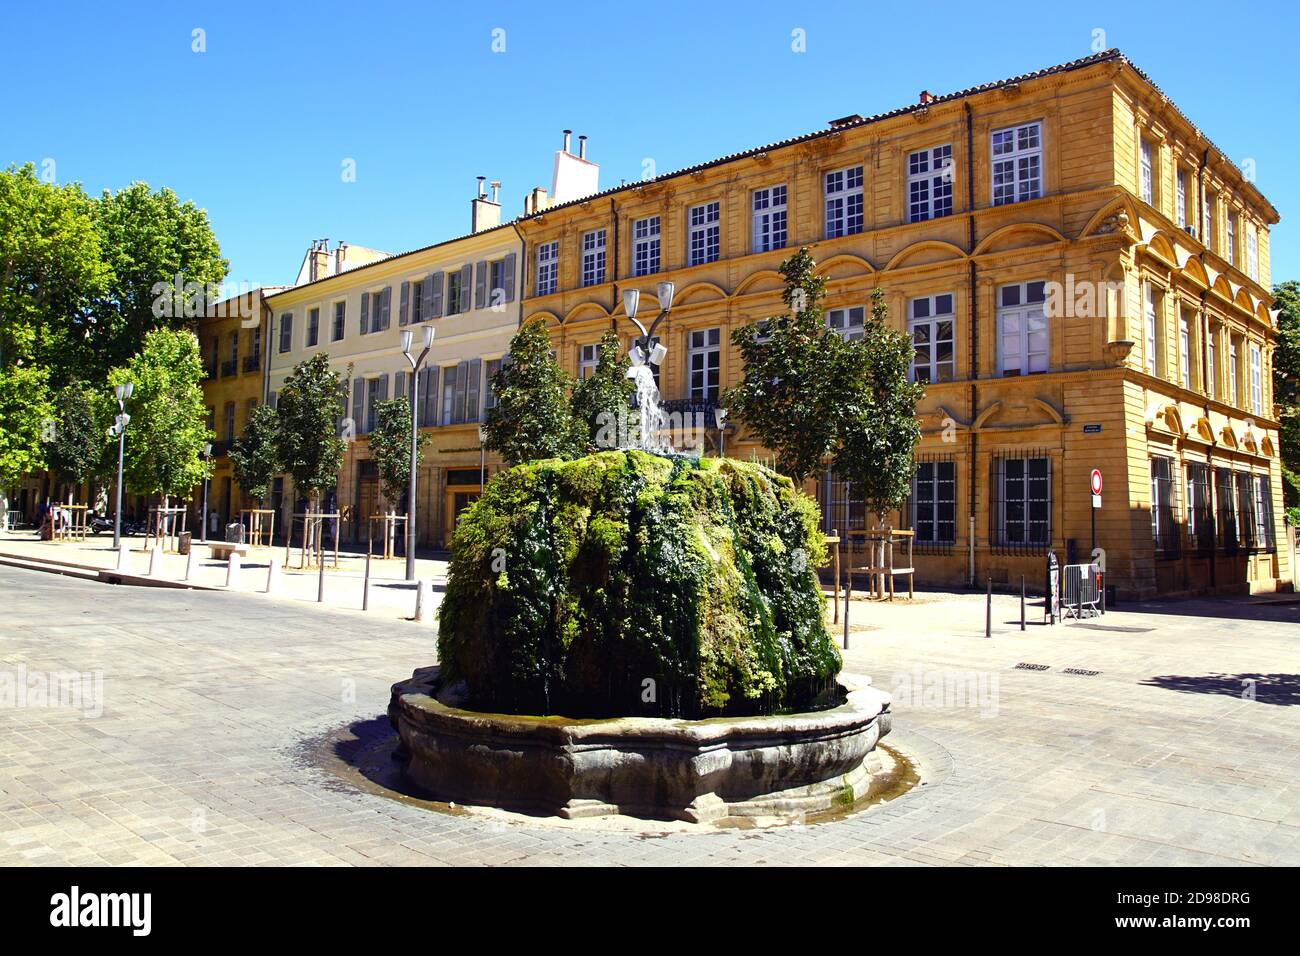 The "Cours Mirabeau" in Aix-en-Provence, France Stock Photo